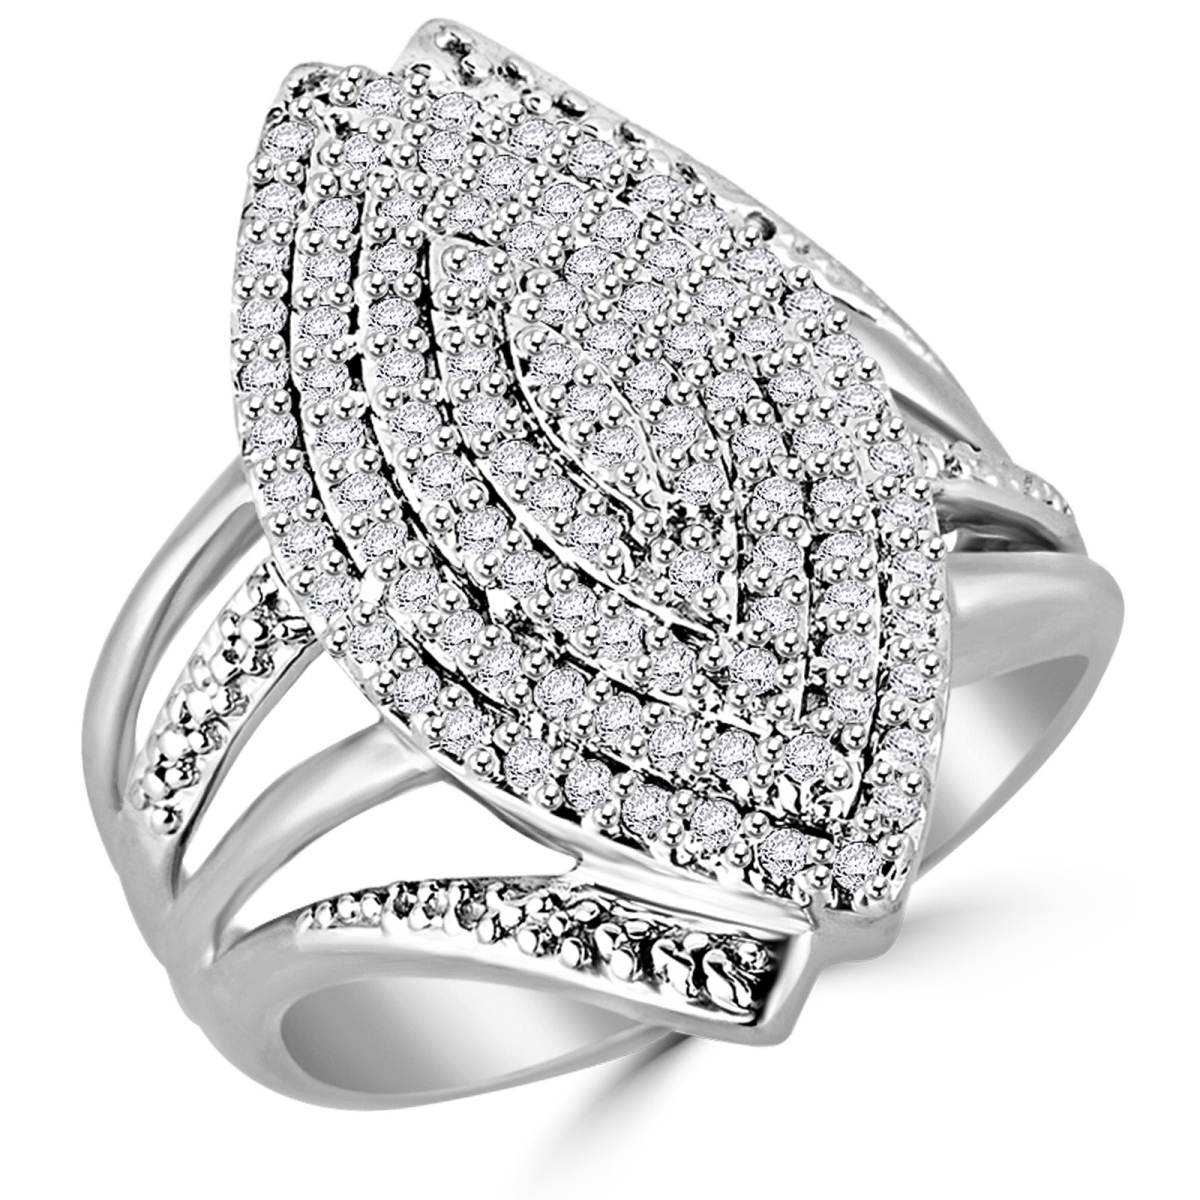 Picture of Majesty Diamonds MDR180001-3.5 0.5 CTW Round Diamond Marquise Cocktail Ring in 14K White Gold - Size 3.5